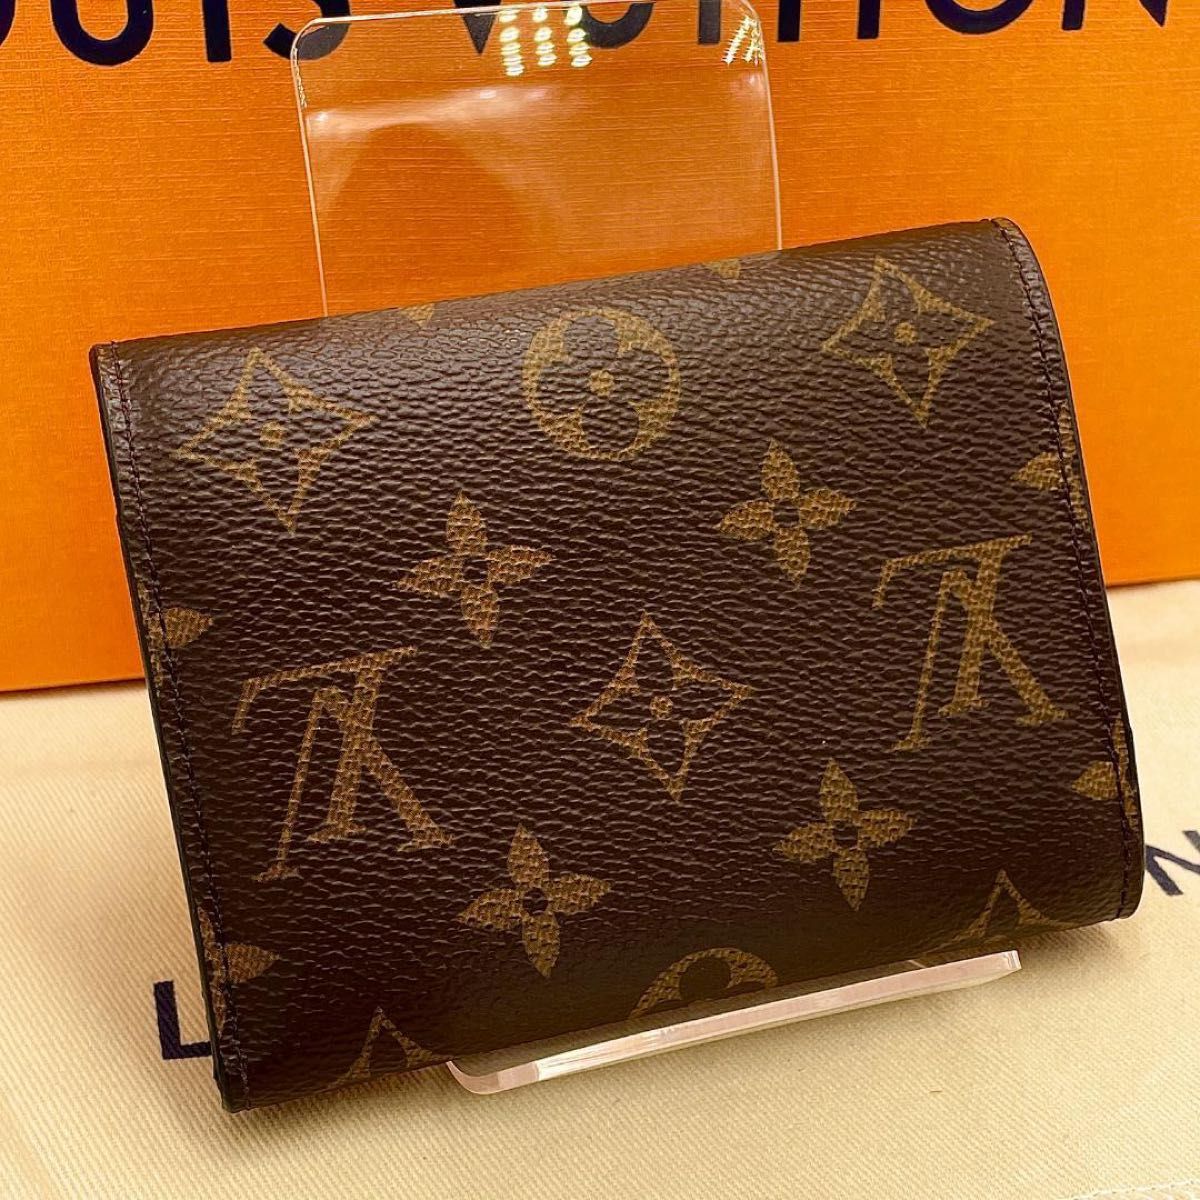 LOUIS VUITTON ルイヴィトン　モノグラム　ポルトフォイユ ヴィクトリーヌ　折財布　コンパクト 